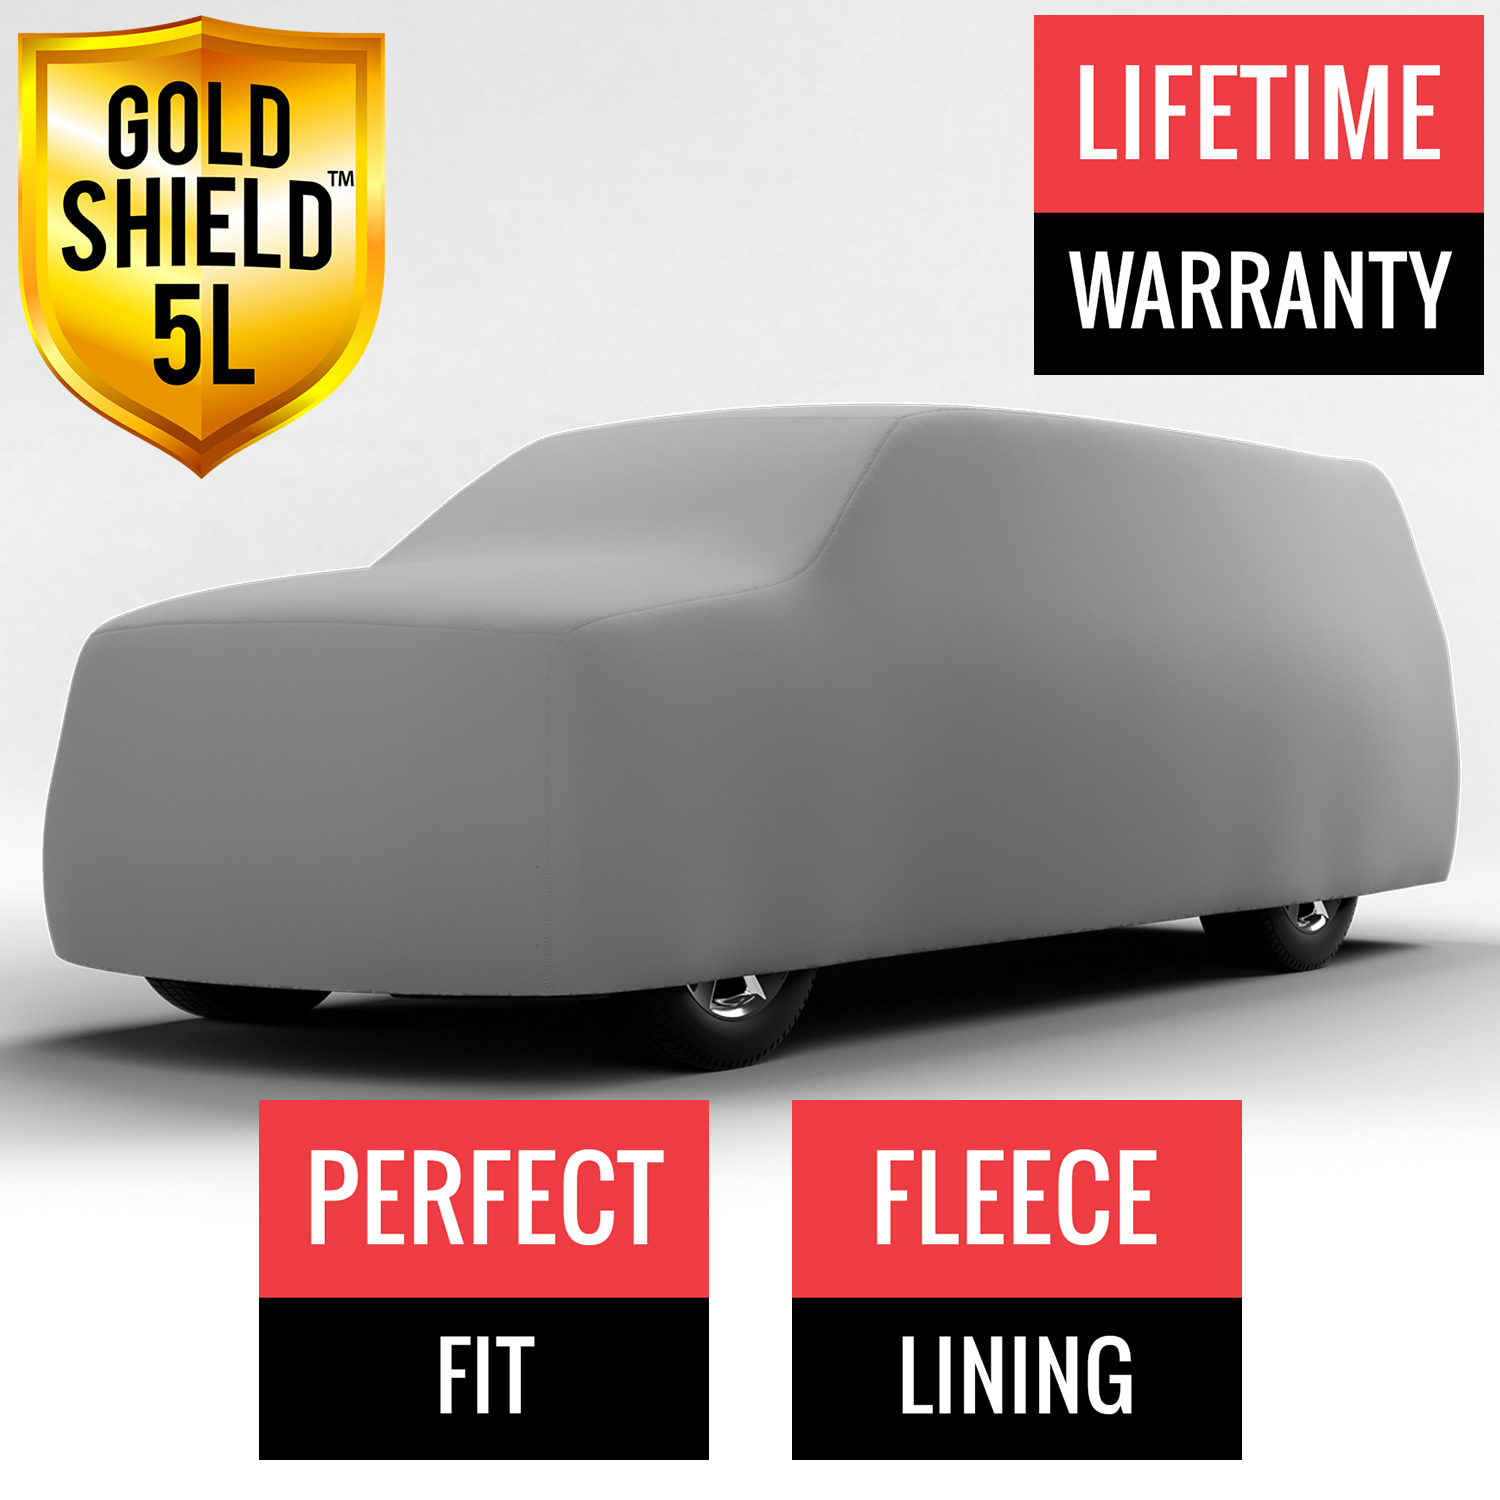 Gold Shield 5L - Car Cover for GMC Pickup 1975 Extended Cab Pickup 6.5 Feet Bed with Camper Shell